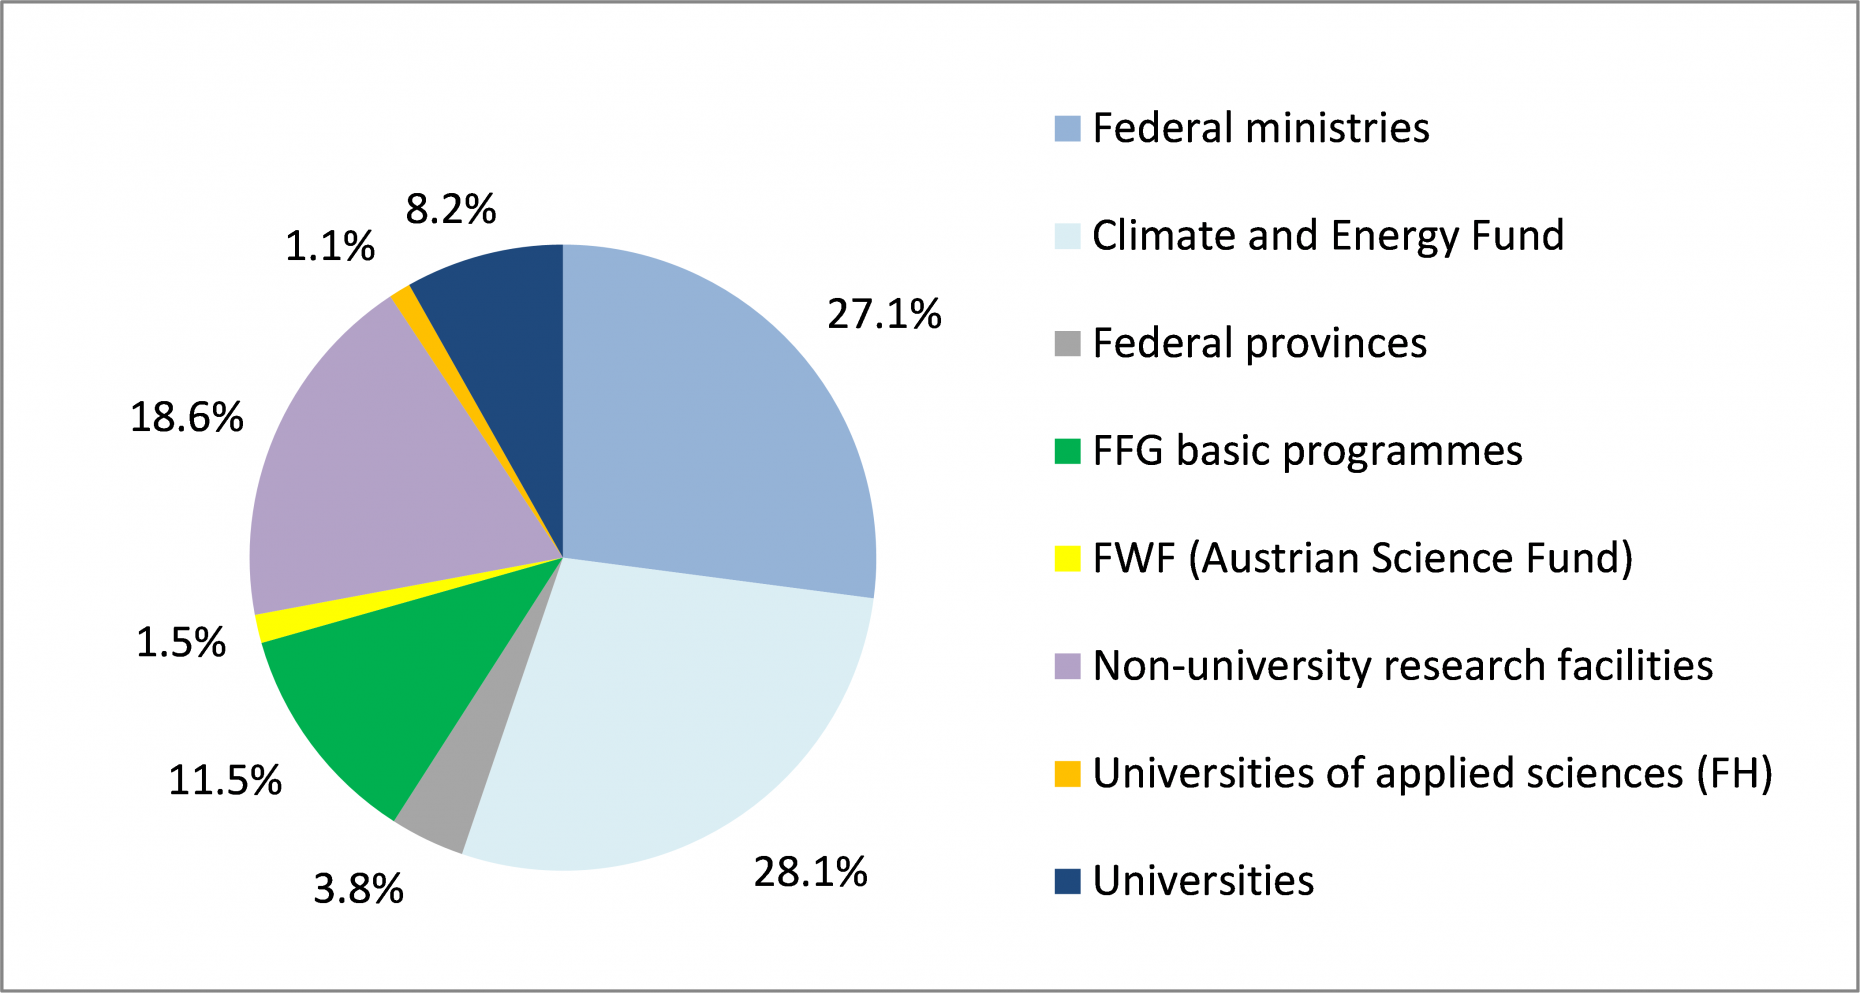 Expenditures for Energy Research & Development in Austria 2020 in total by institutions